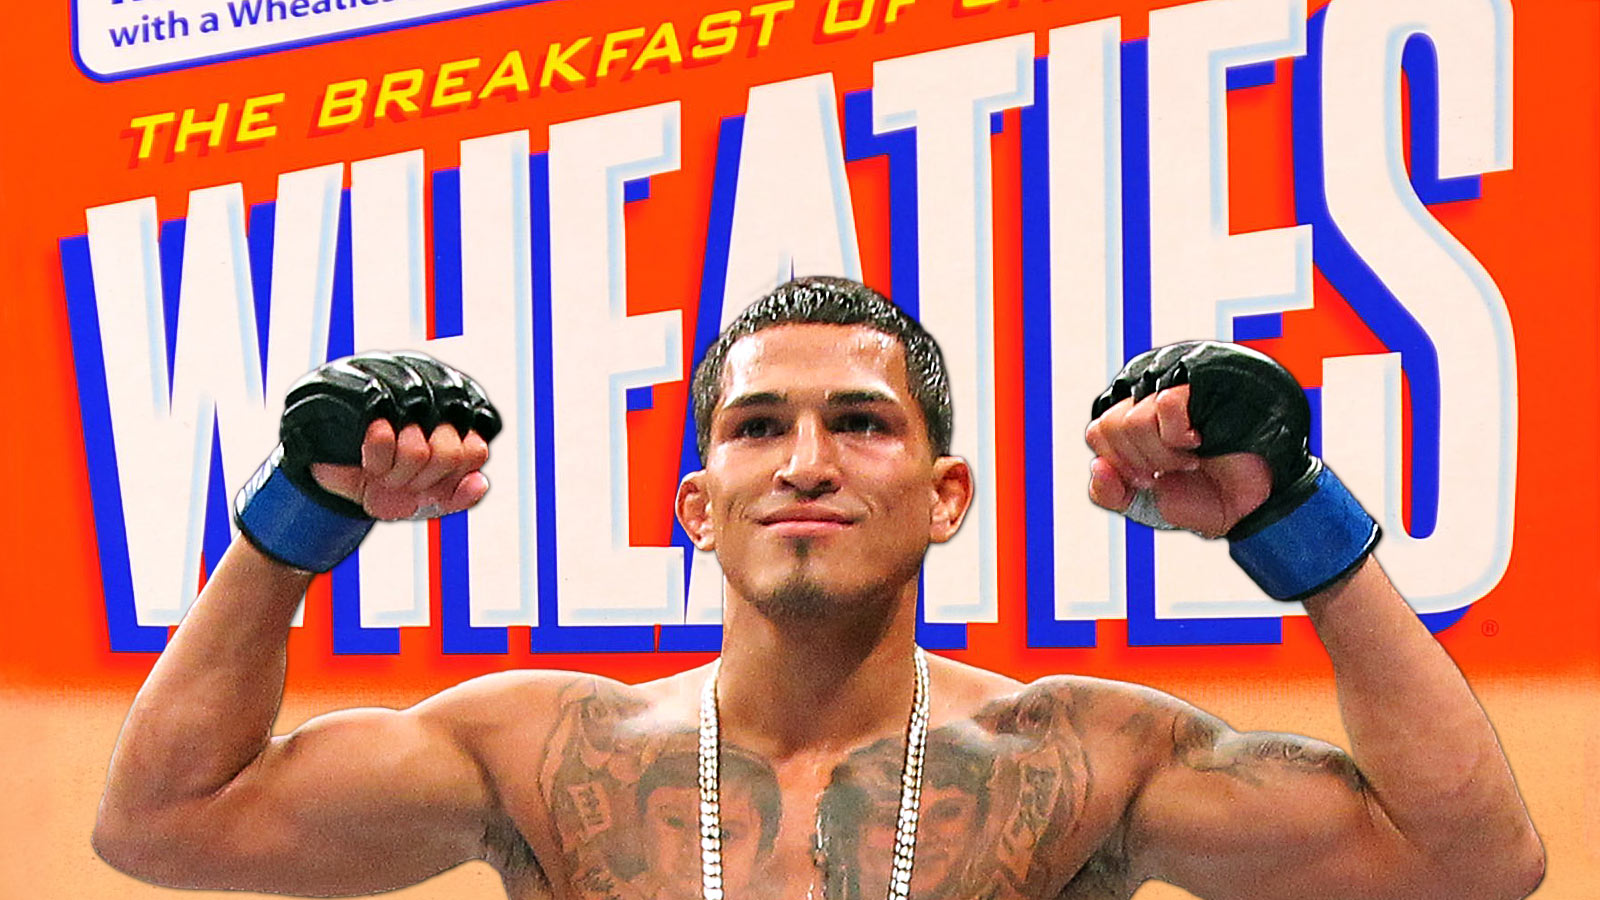 Anthony Pettis In The Running To Land Wheaties Box Cover Fox Sports